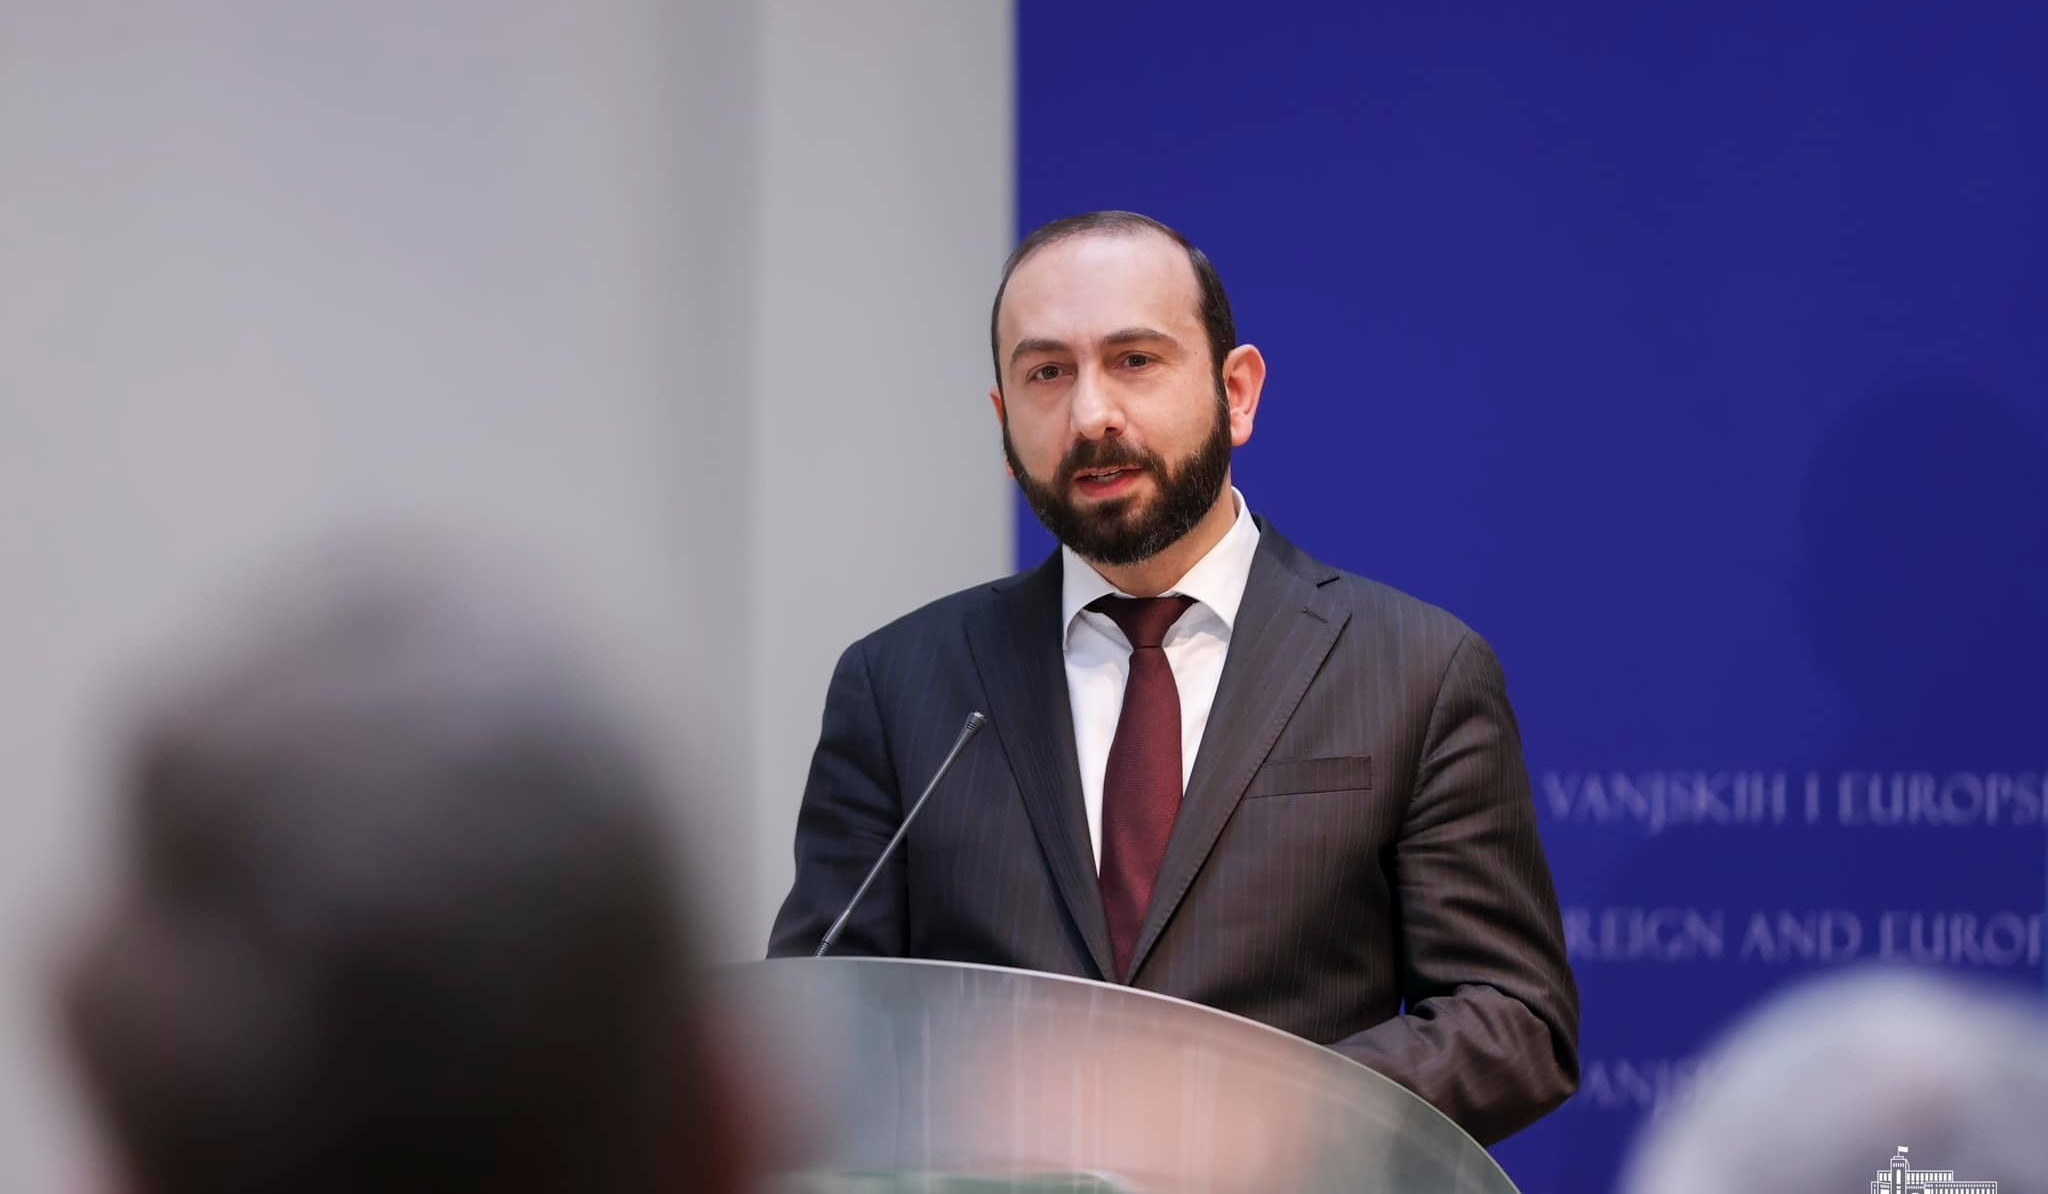 Ararat Mirzoyan will be part of delegation led by Prime Minister in Munich